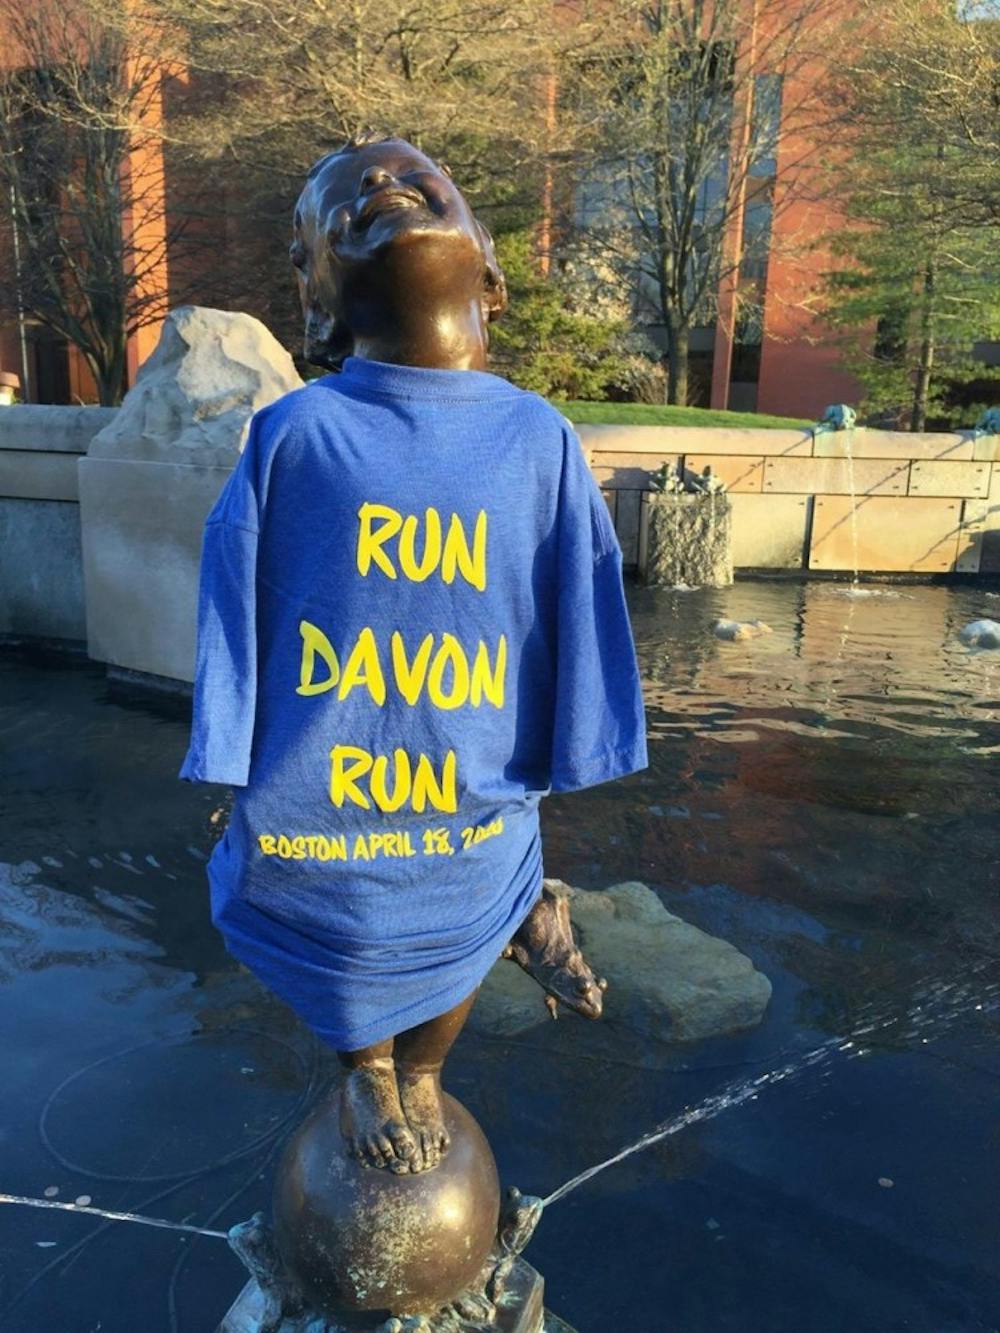 <p>Davon Geiger, president of Ball State’s Run Club, competed with 30,000 runners in the Boston Marathon on April 18. The shirt shown above was made for Geiger’s family and Run Club to wear.<em> PHOTO COURTESY OF KENDRA STORZ</em></p>